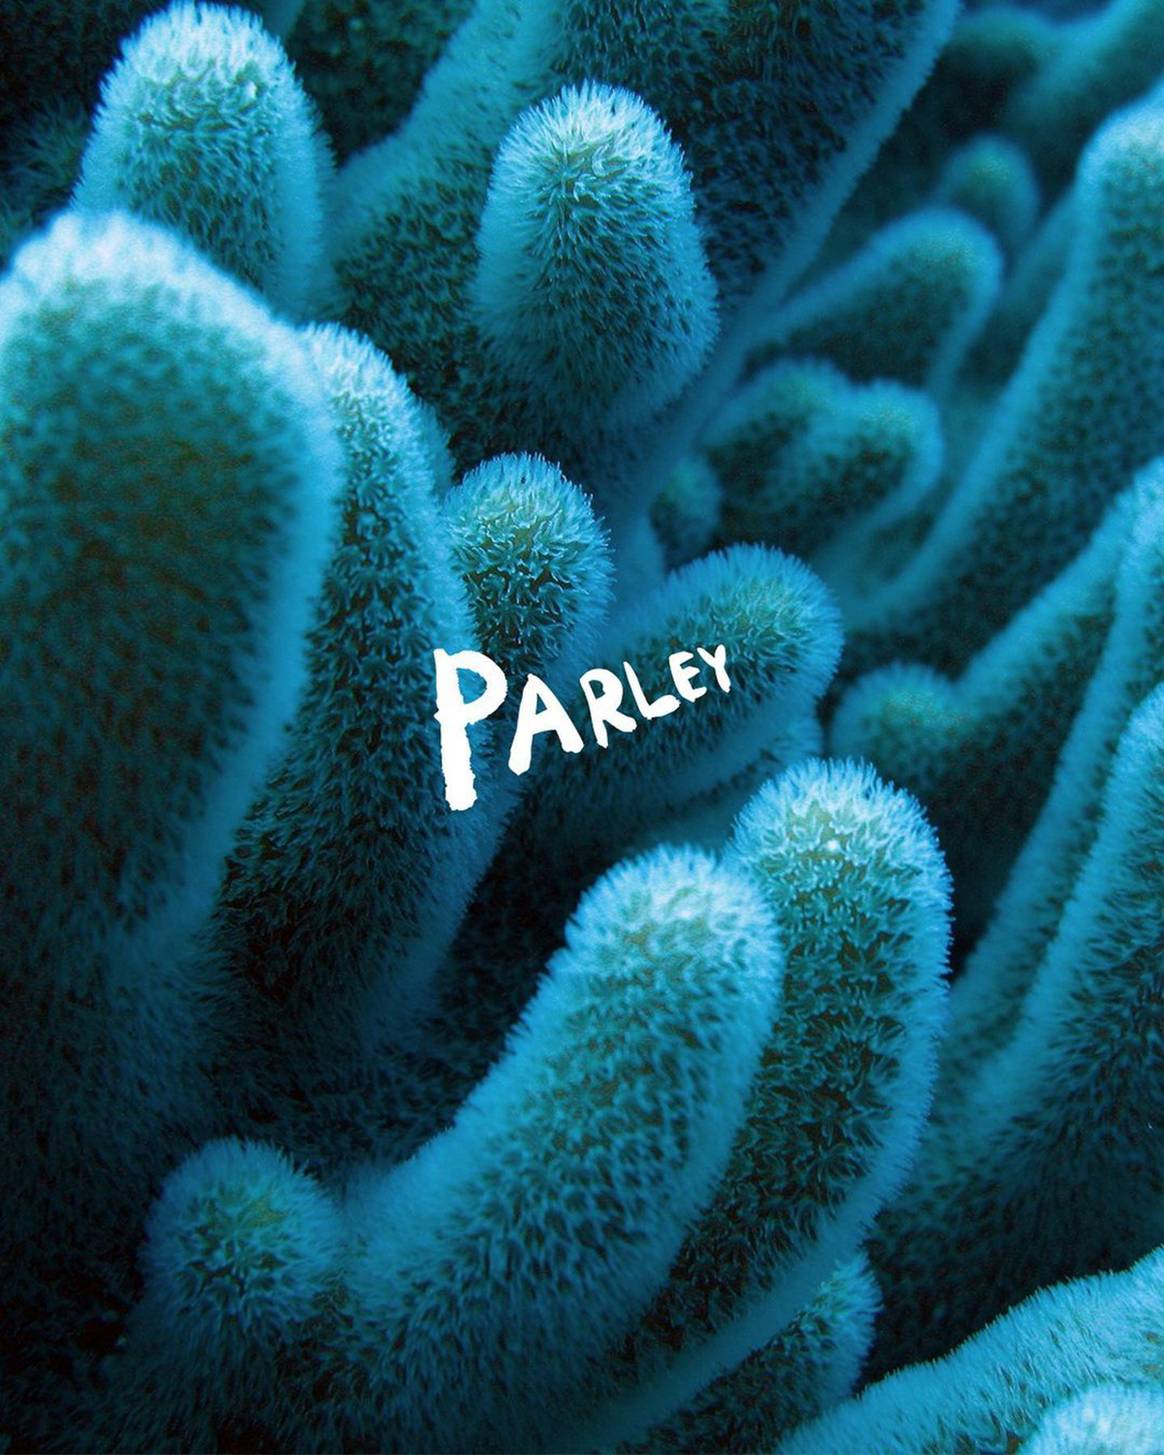 Photo Credits: Parley for The Oceans.